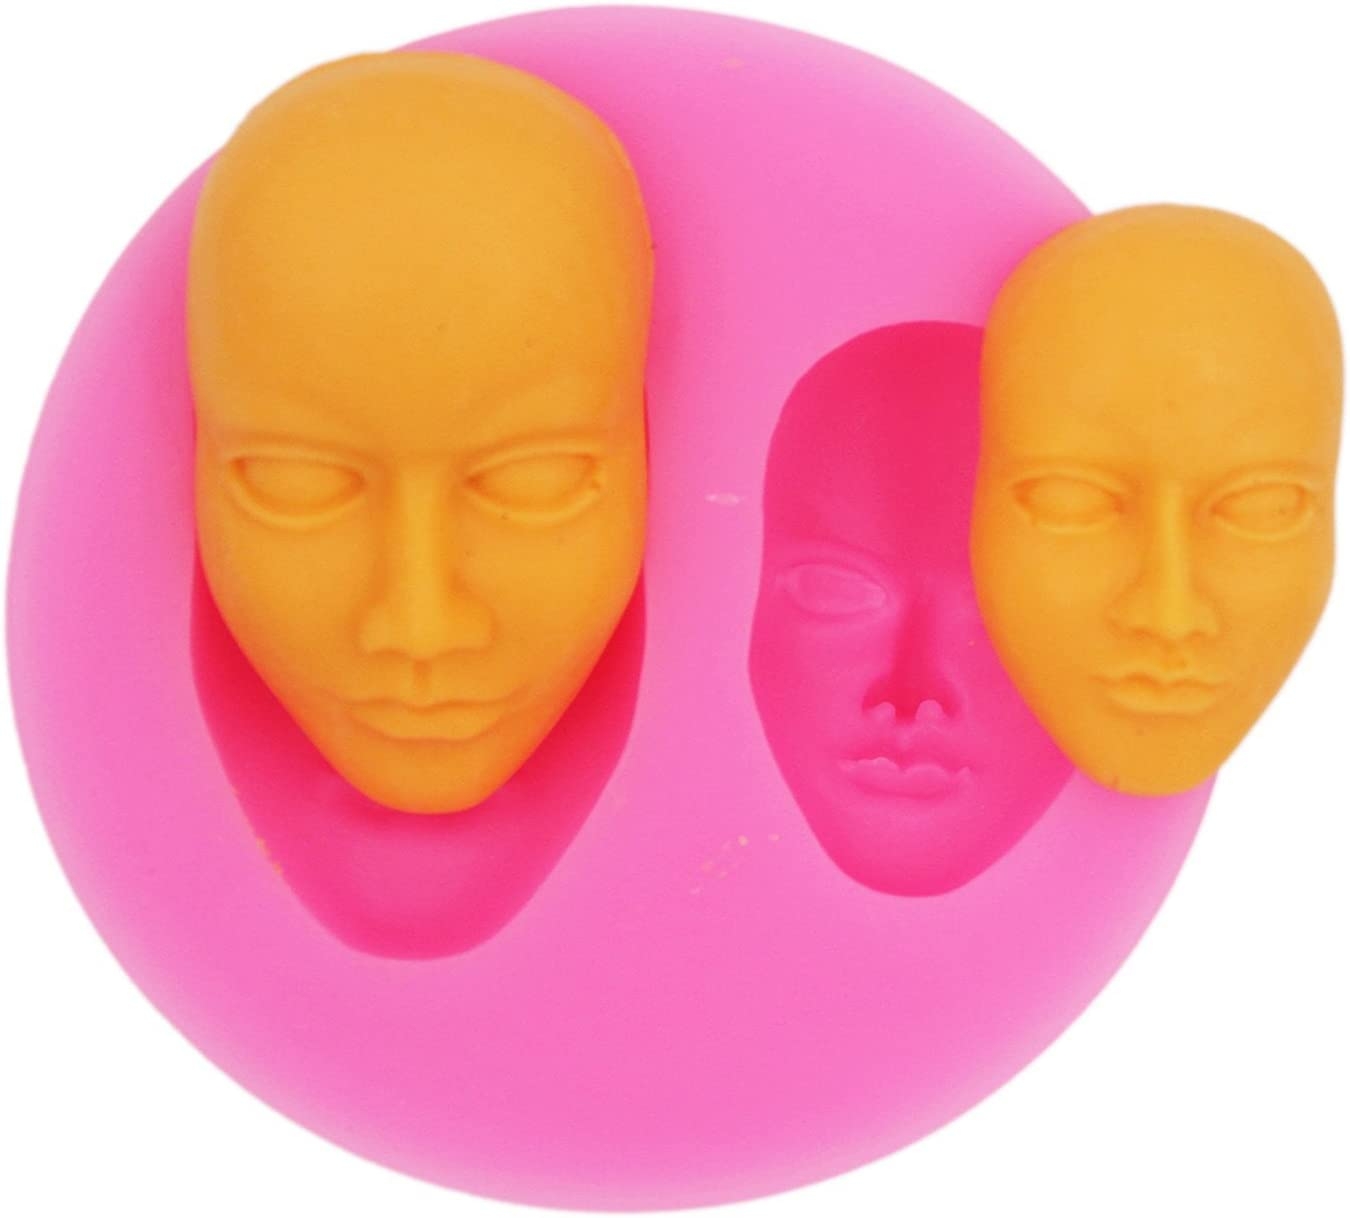 COMIART 3D Face Mold Silicone Mould for Soap Art Making Candy Fondant Cake Pottery Clay Sculpture Modeling Fimo Import To Shop